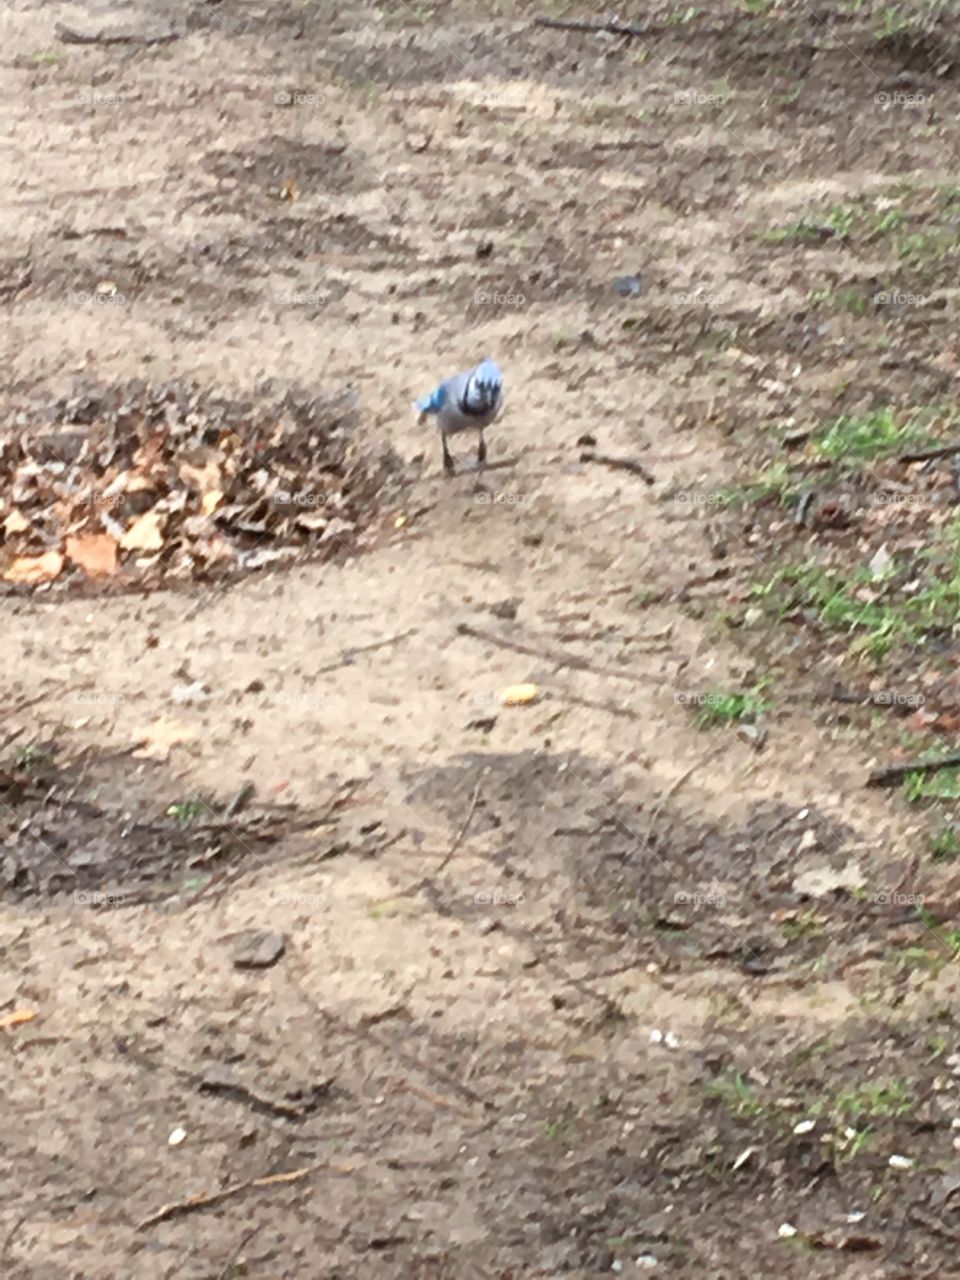 Blue jay landed on the ground to get himself a peanut to eat. They can’t get enough peanuts to eat.